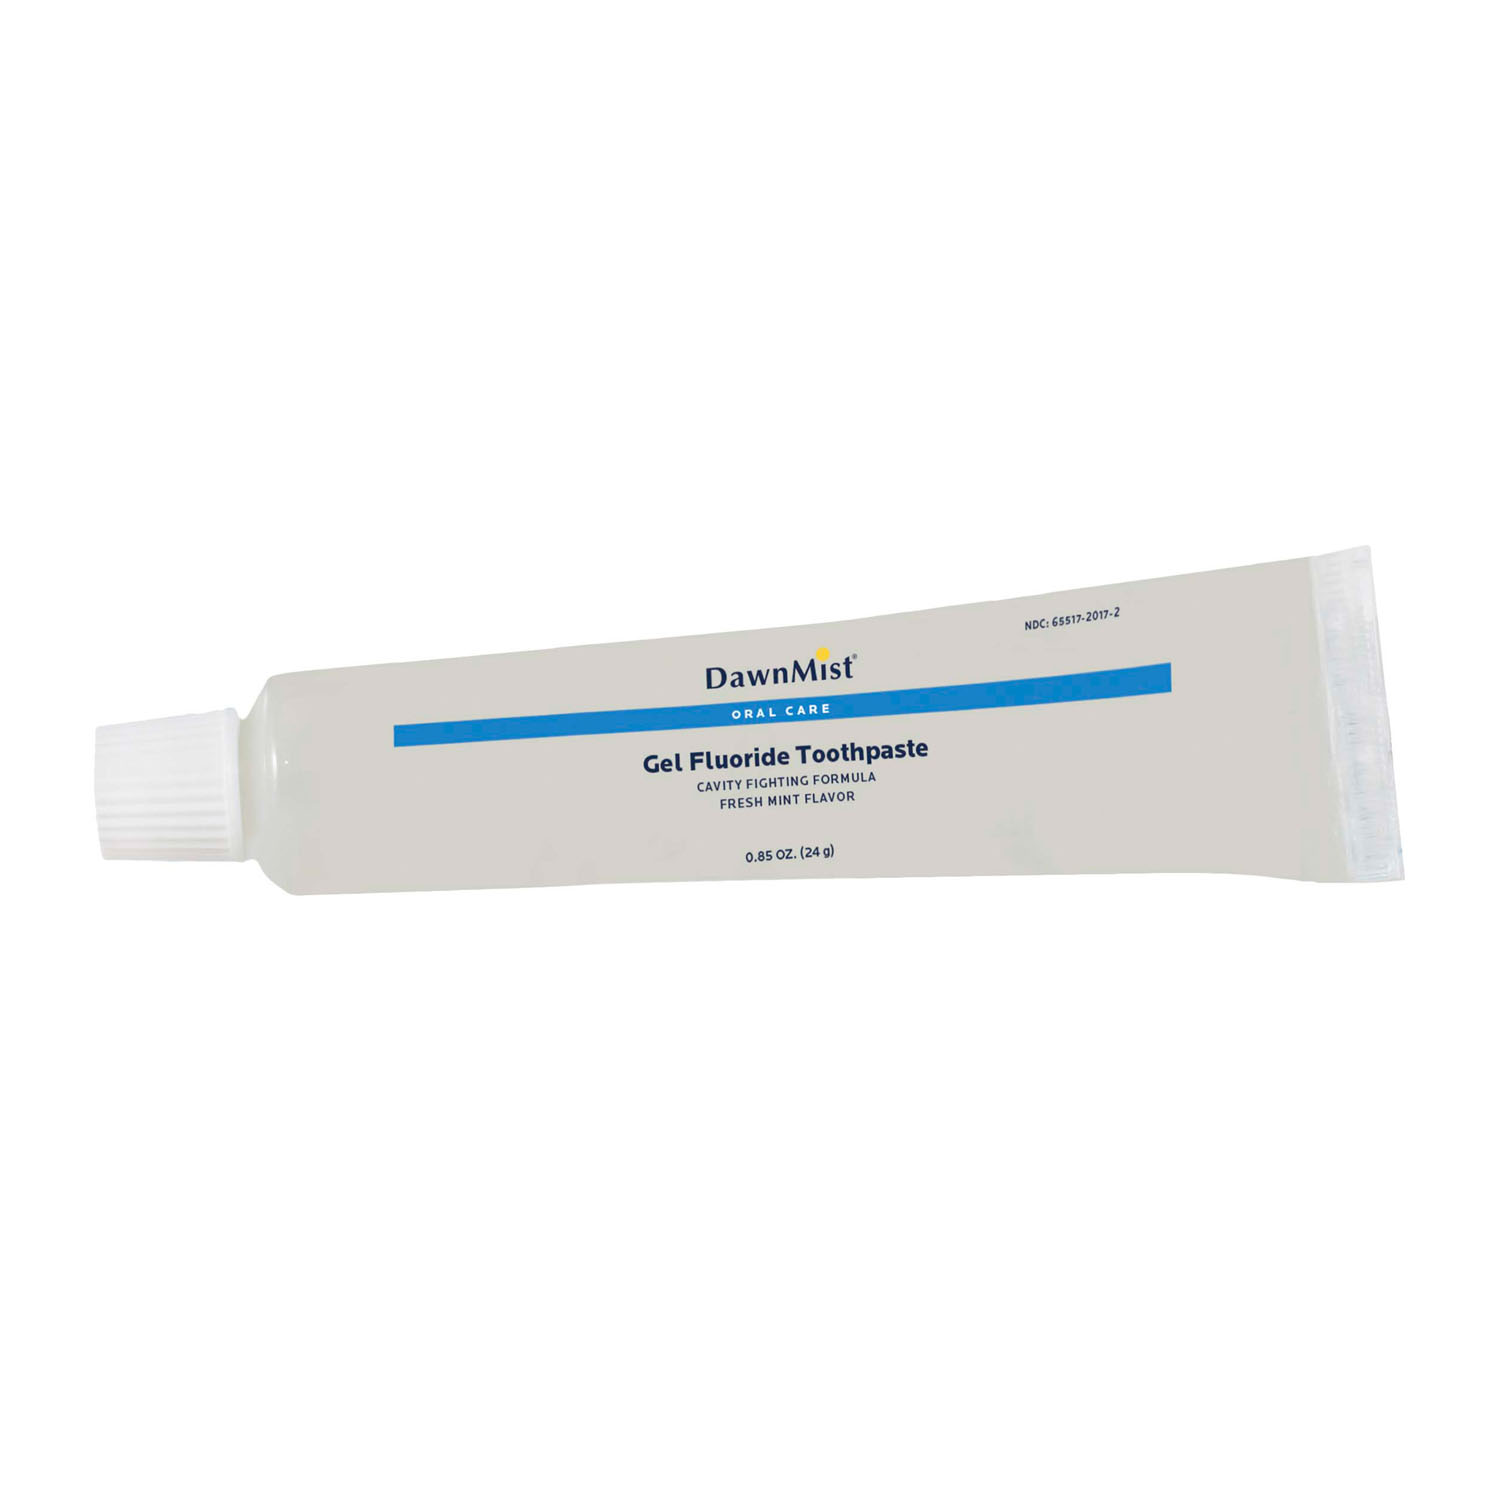 DUKAL DAWNMIST TOOTHPASTE : GTP4661 BX $36.14 Stocked